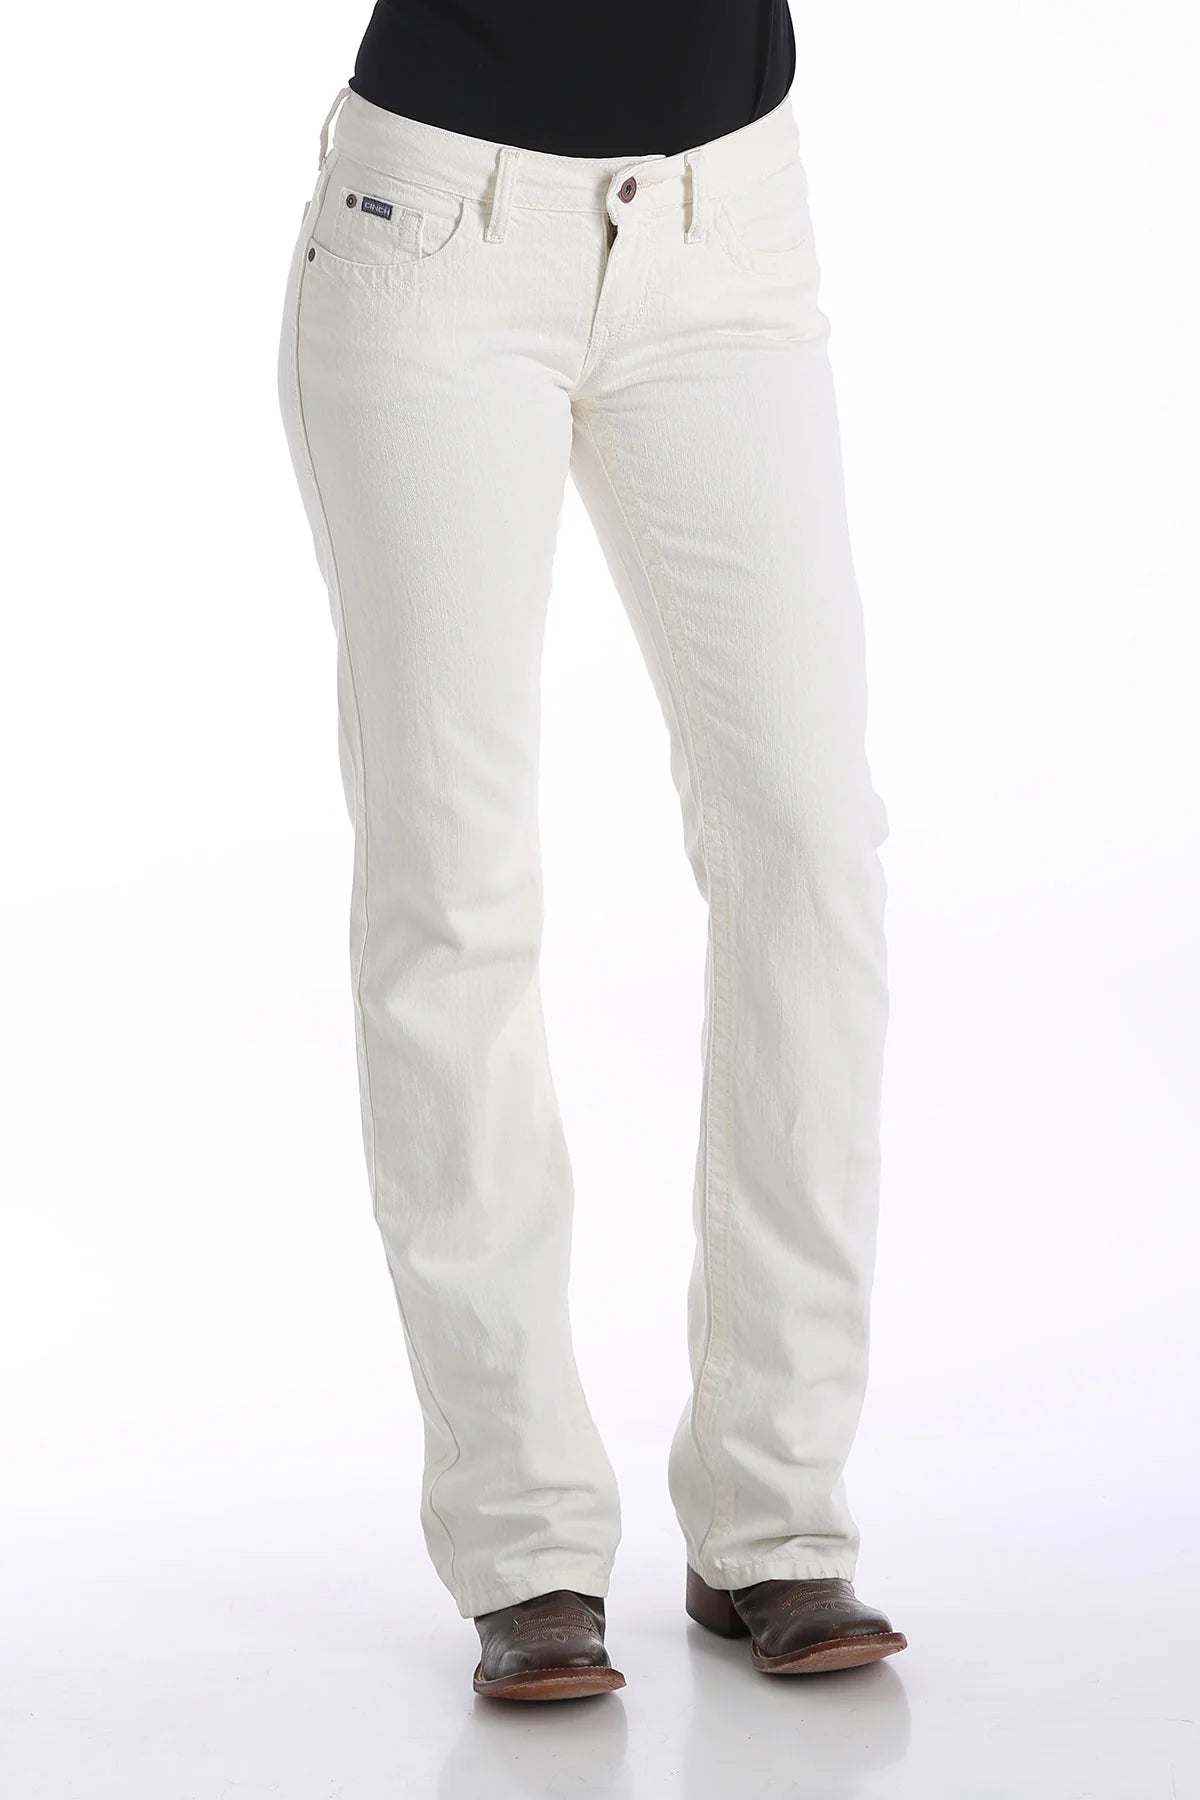 Cinch Ada Relaxed Fit Jean